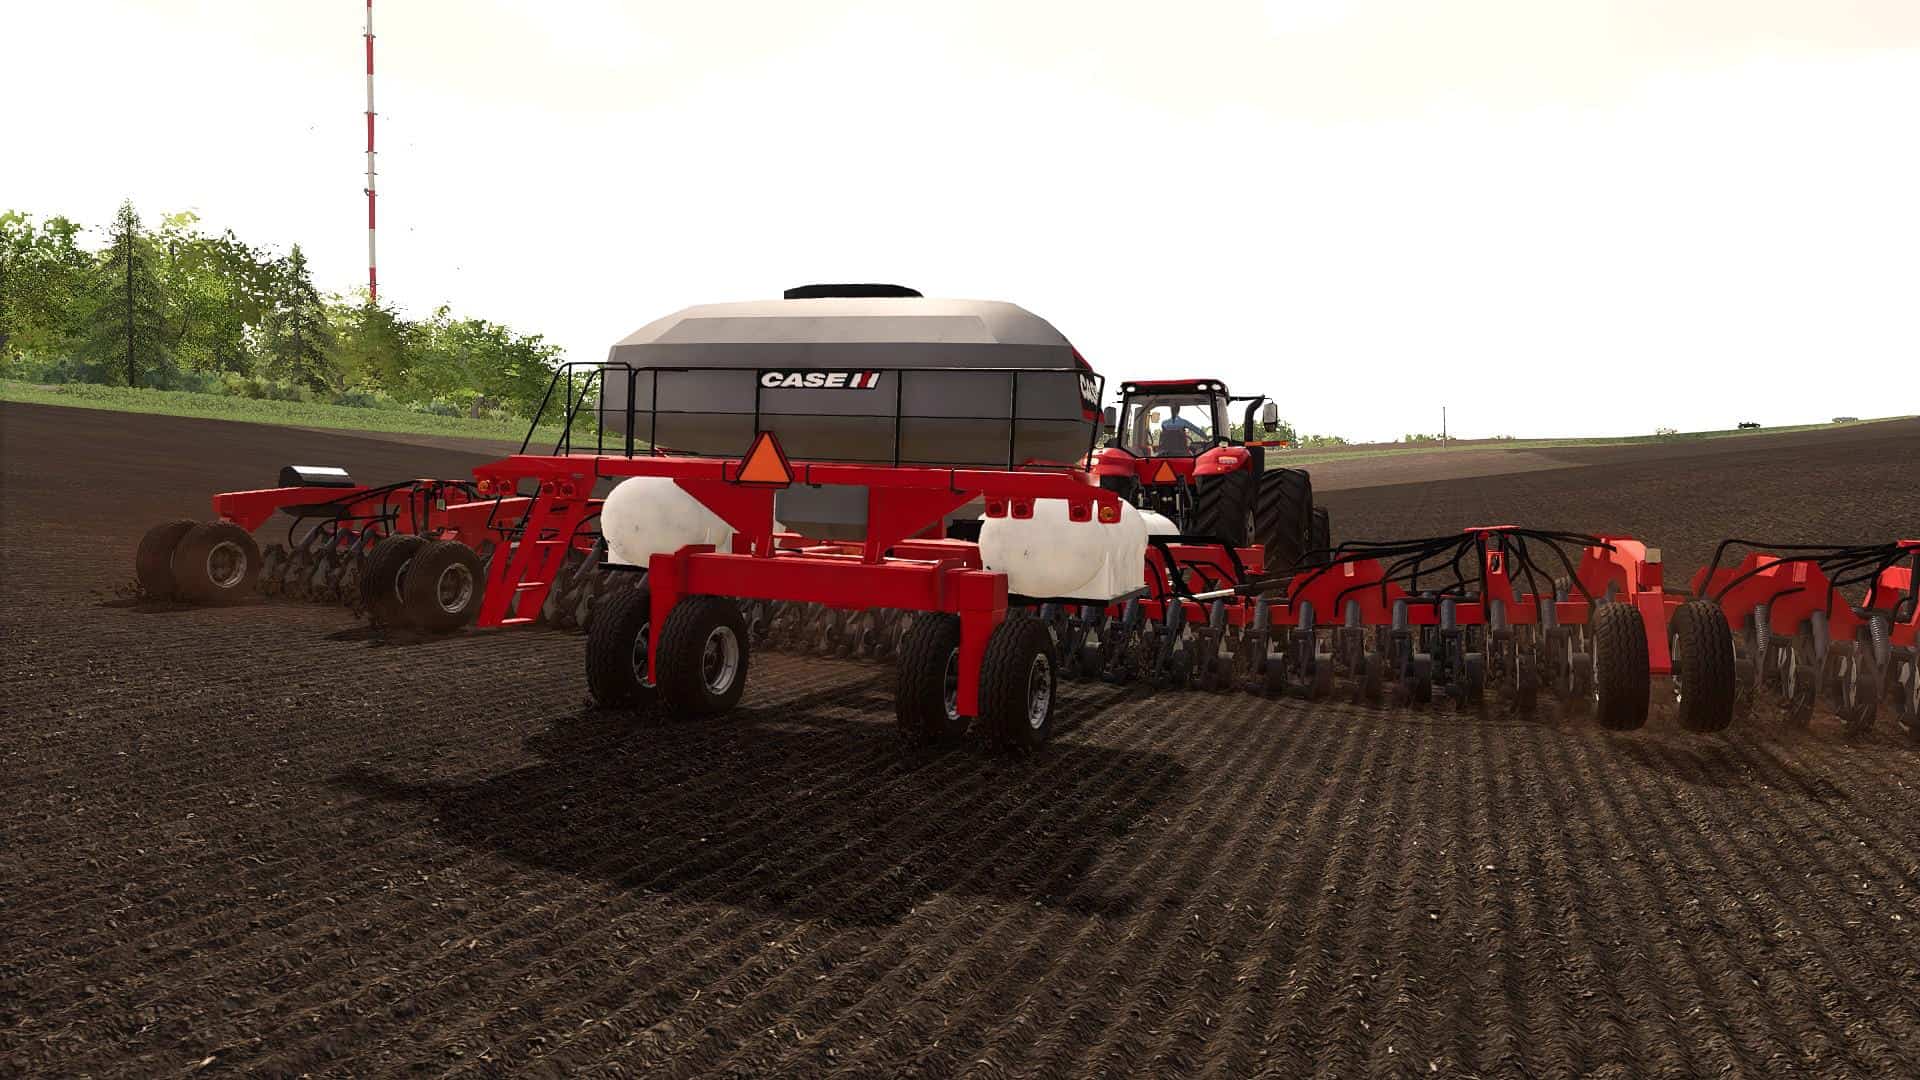 Fs19 Case Ih Precision Disk 500t V20 Fs 19 Implements And Tools Mod